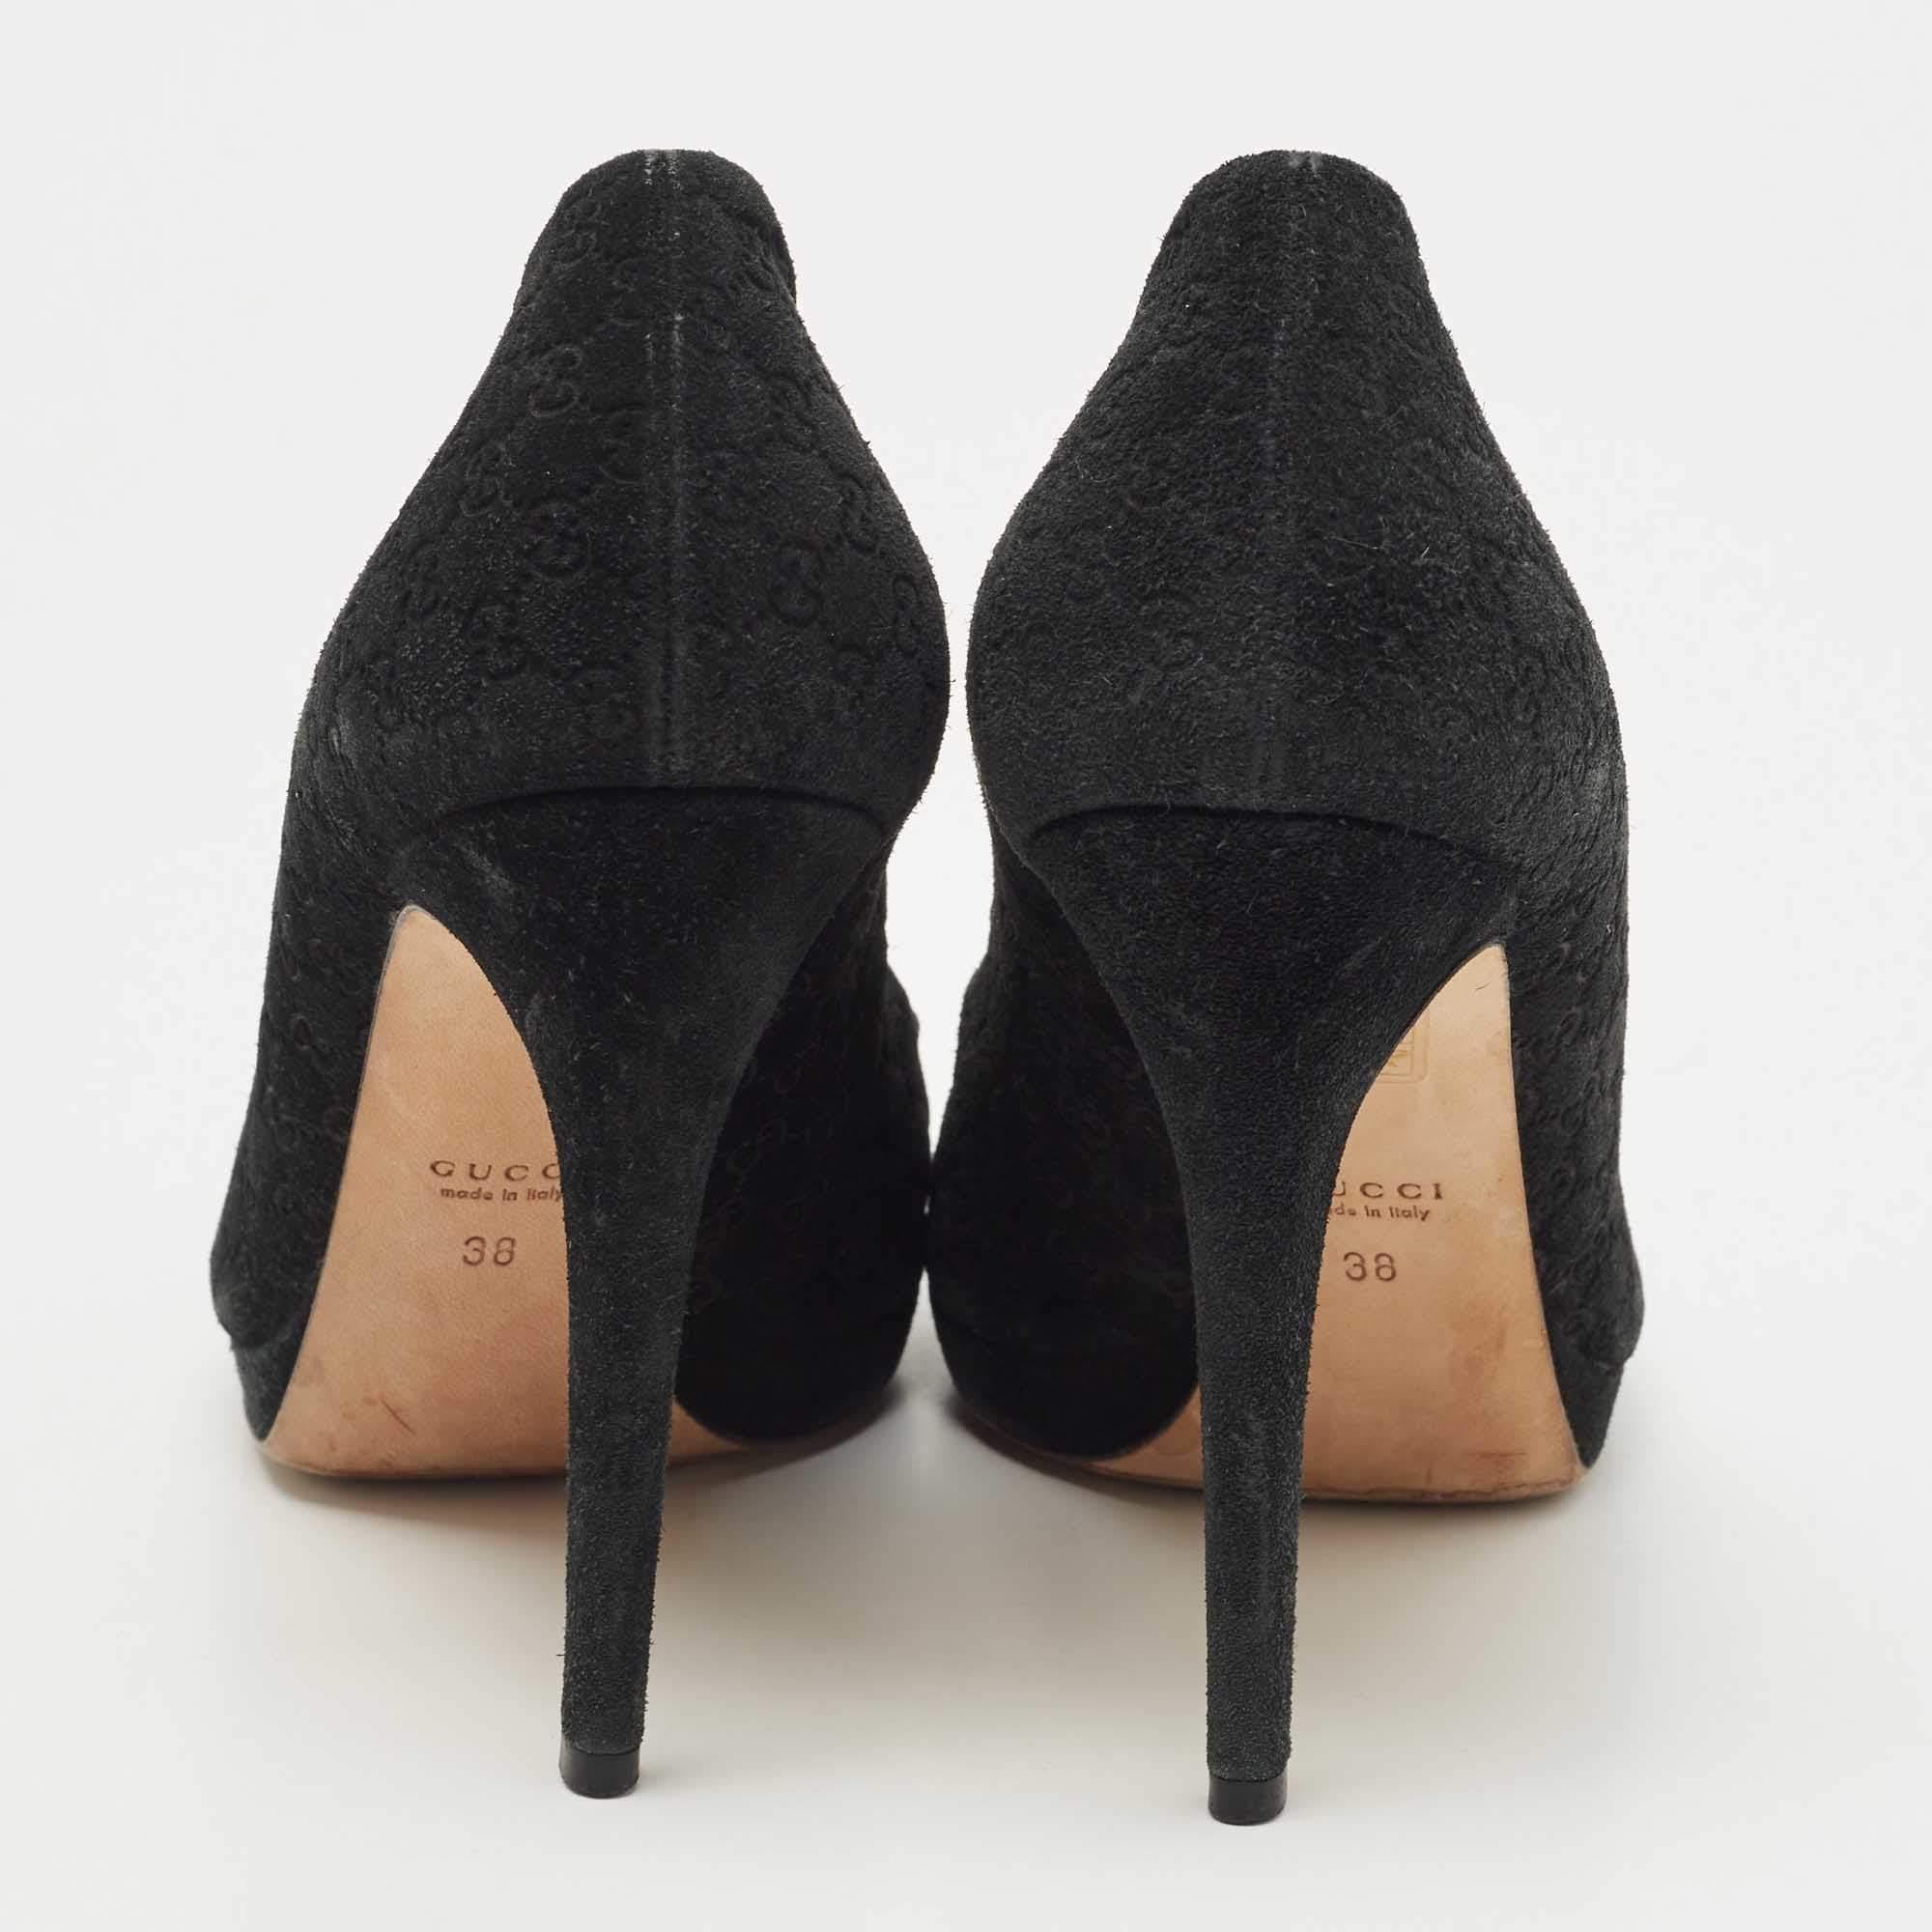 Gucci Black Suede Hollywood Peep Toe Pumps Size 38 For Sale 1